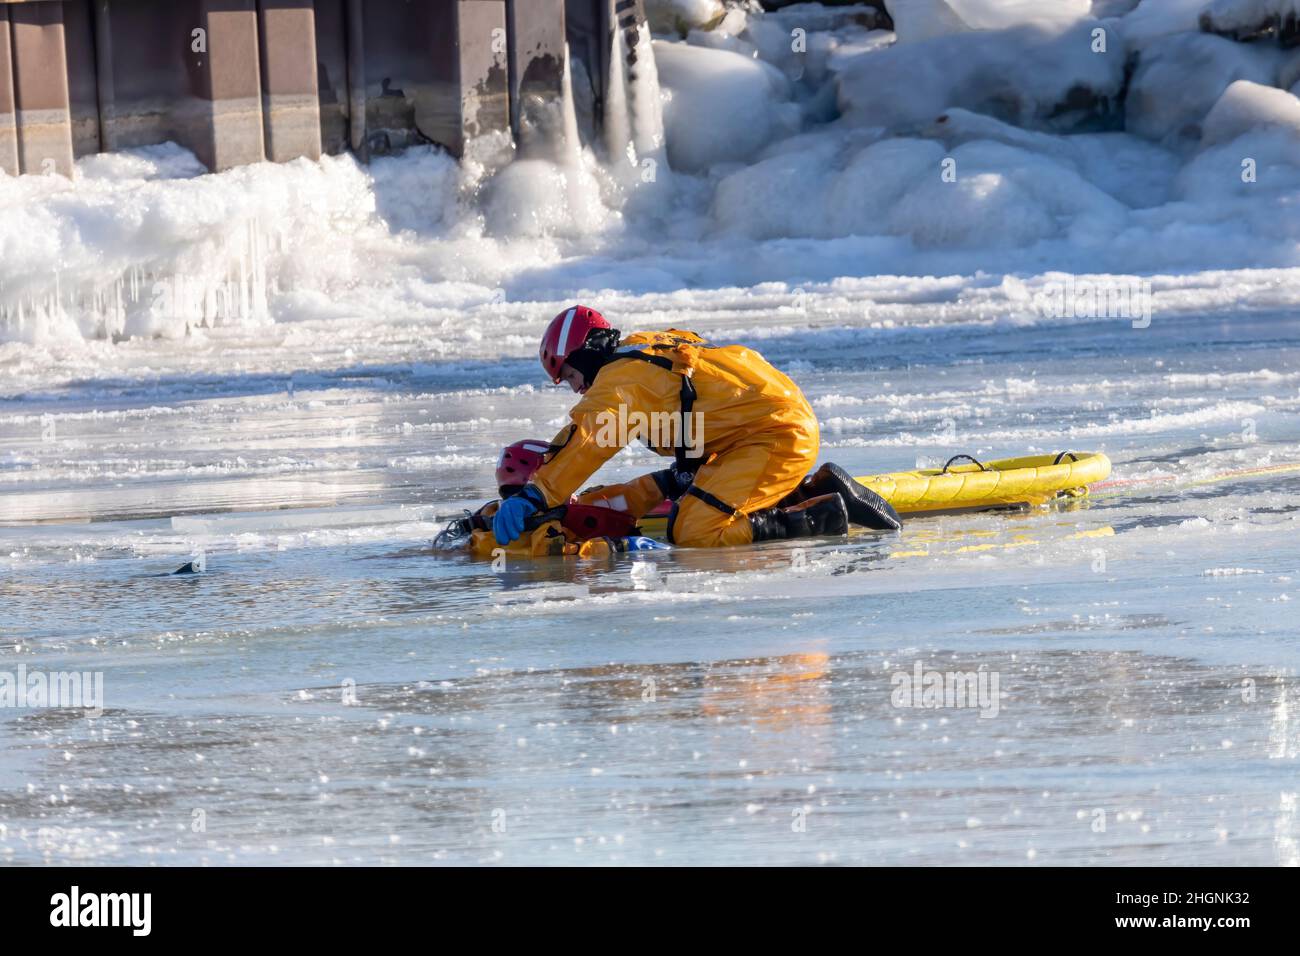 Two Rivers, WI USA January 21 2022: the fire rescue team is practicing rescuing a drowning person on a frozen river Stock Photo